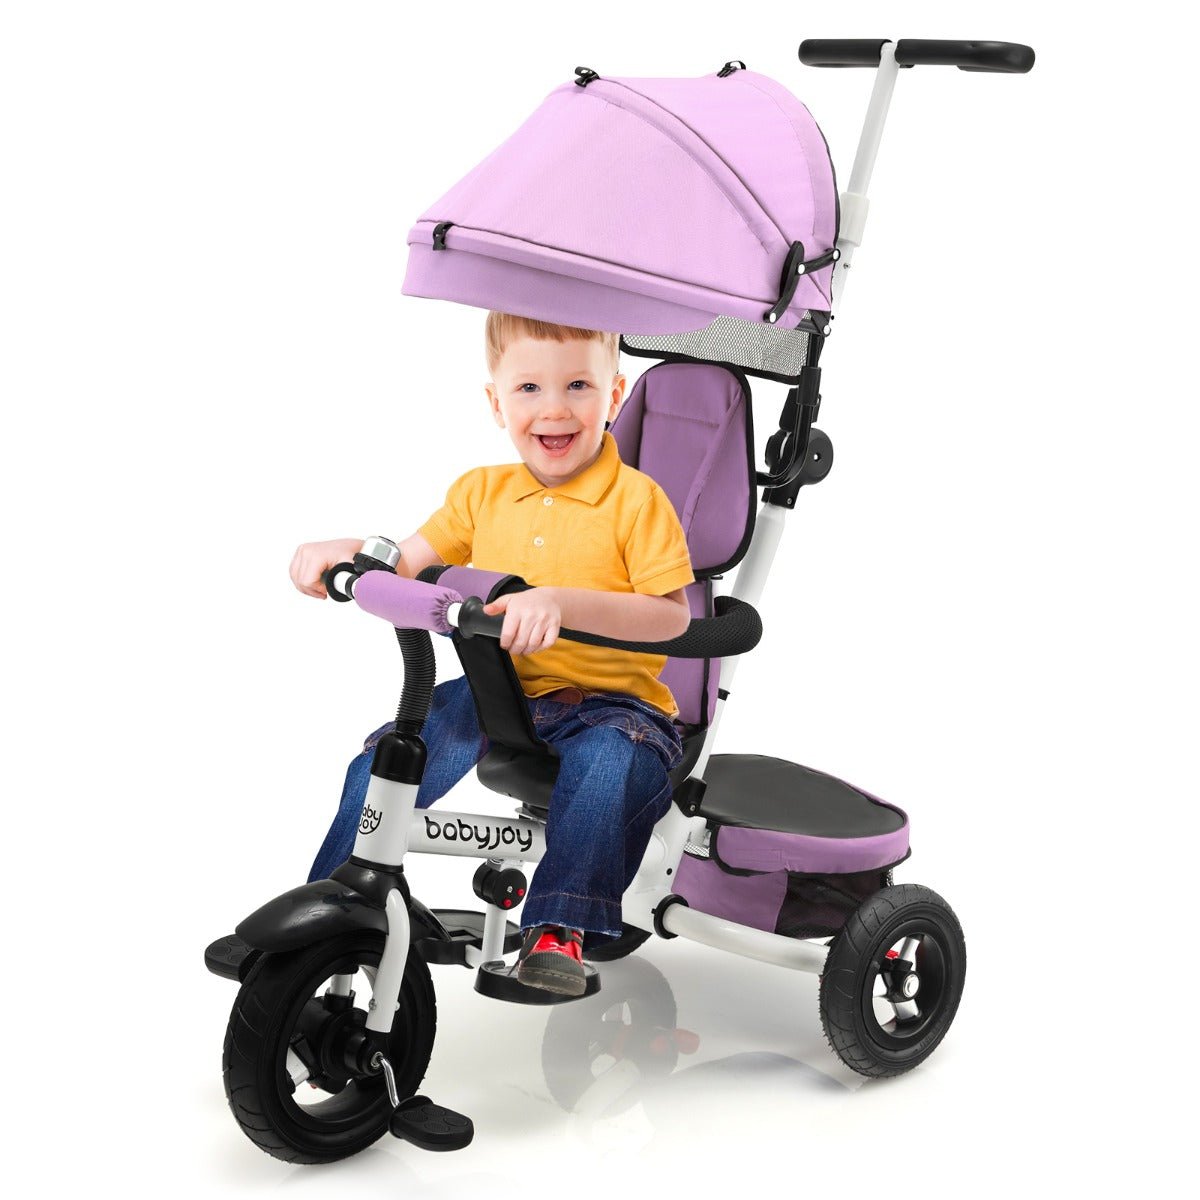 Enhance Stroller Experience with the Pink Baby Tricycle - Buy Now!